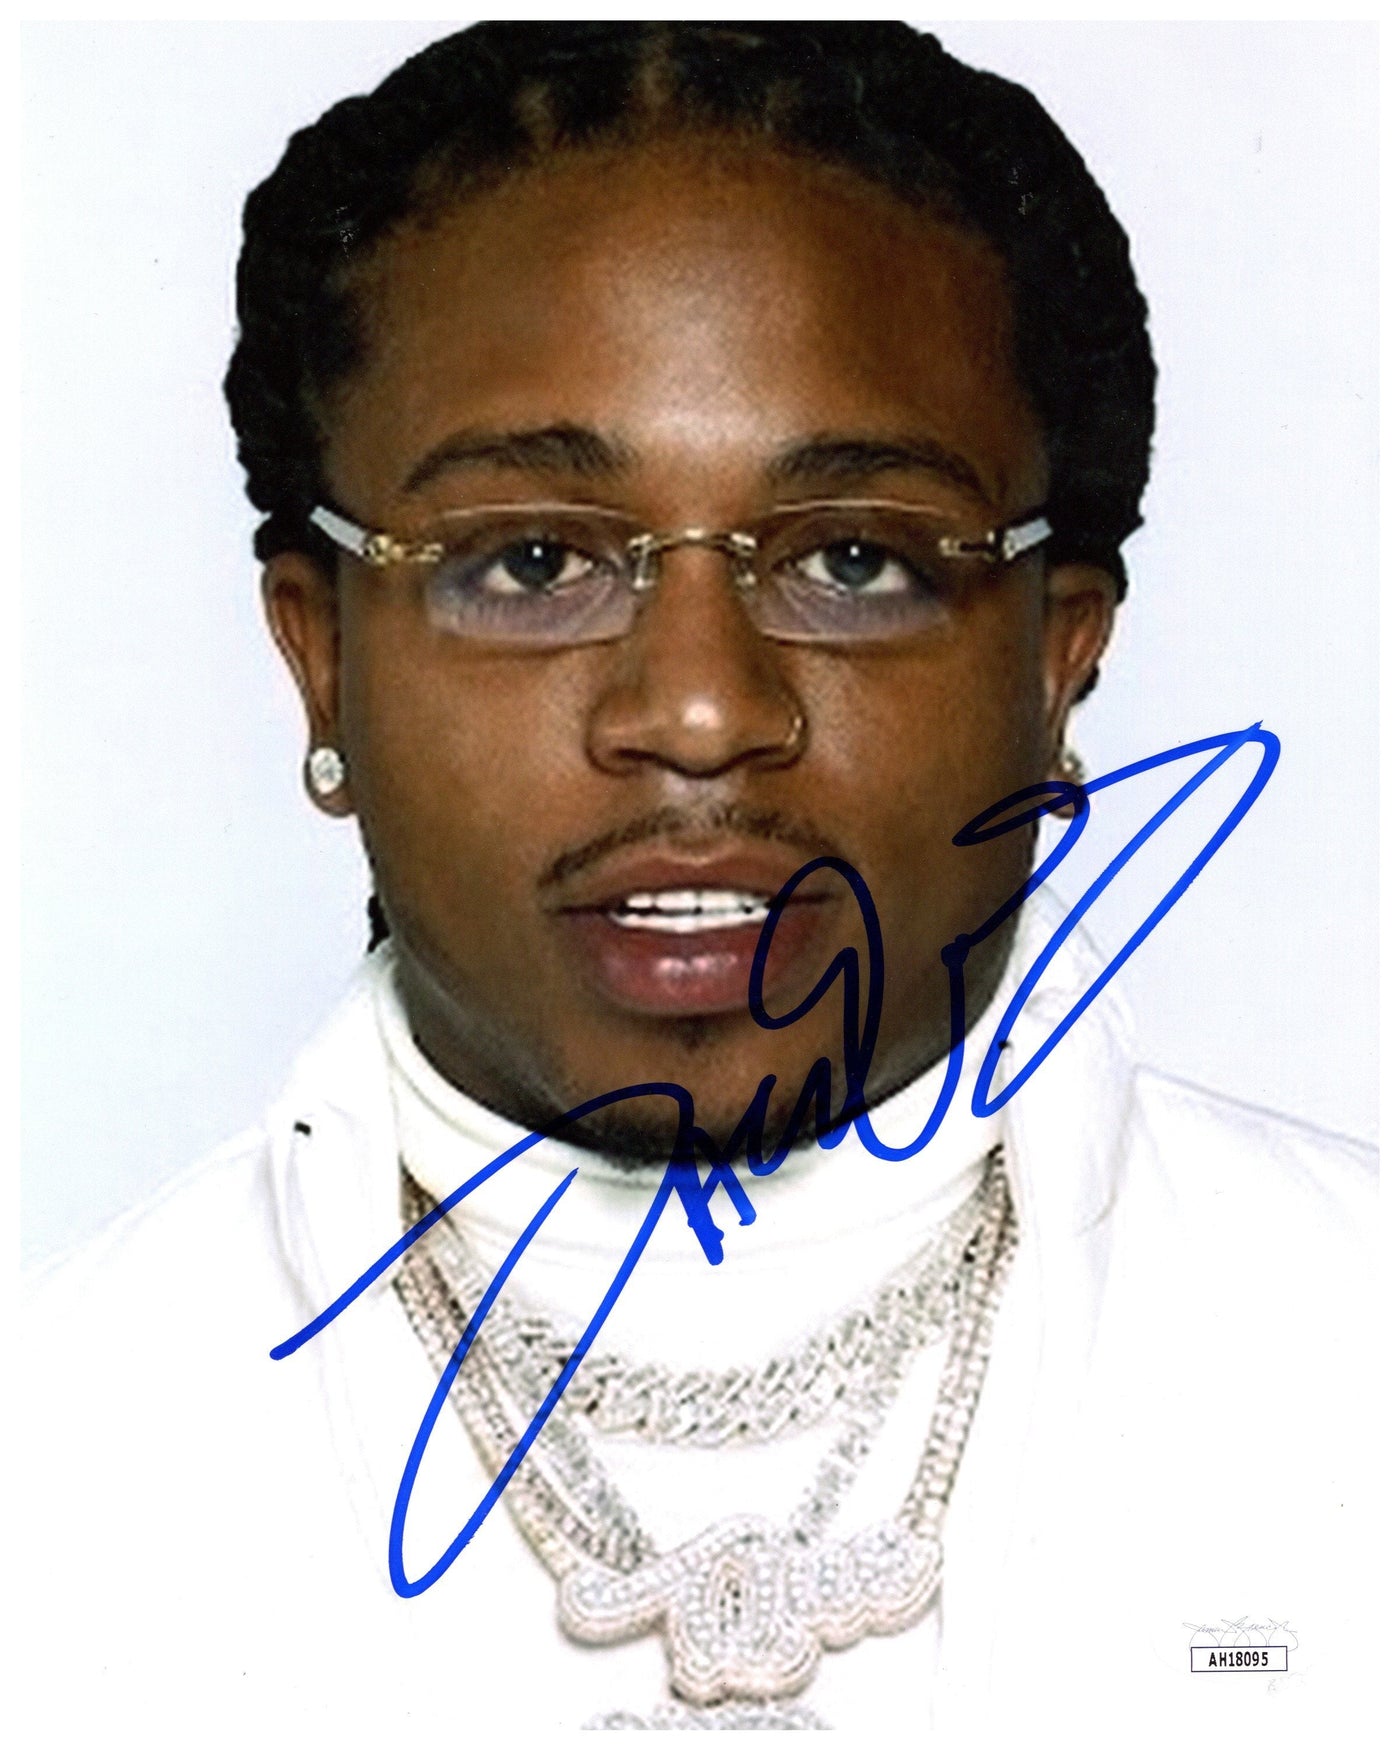 Jacquees Signed 8x10 Photo King of R&B Autographed JSA COA #2